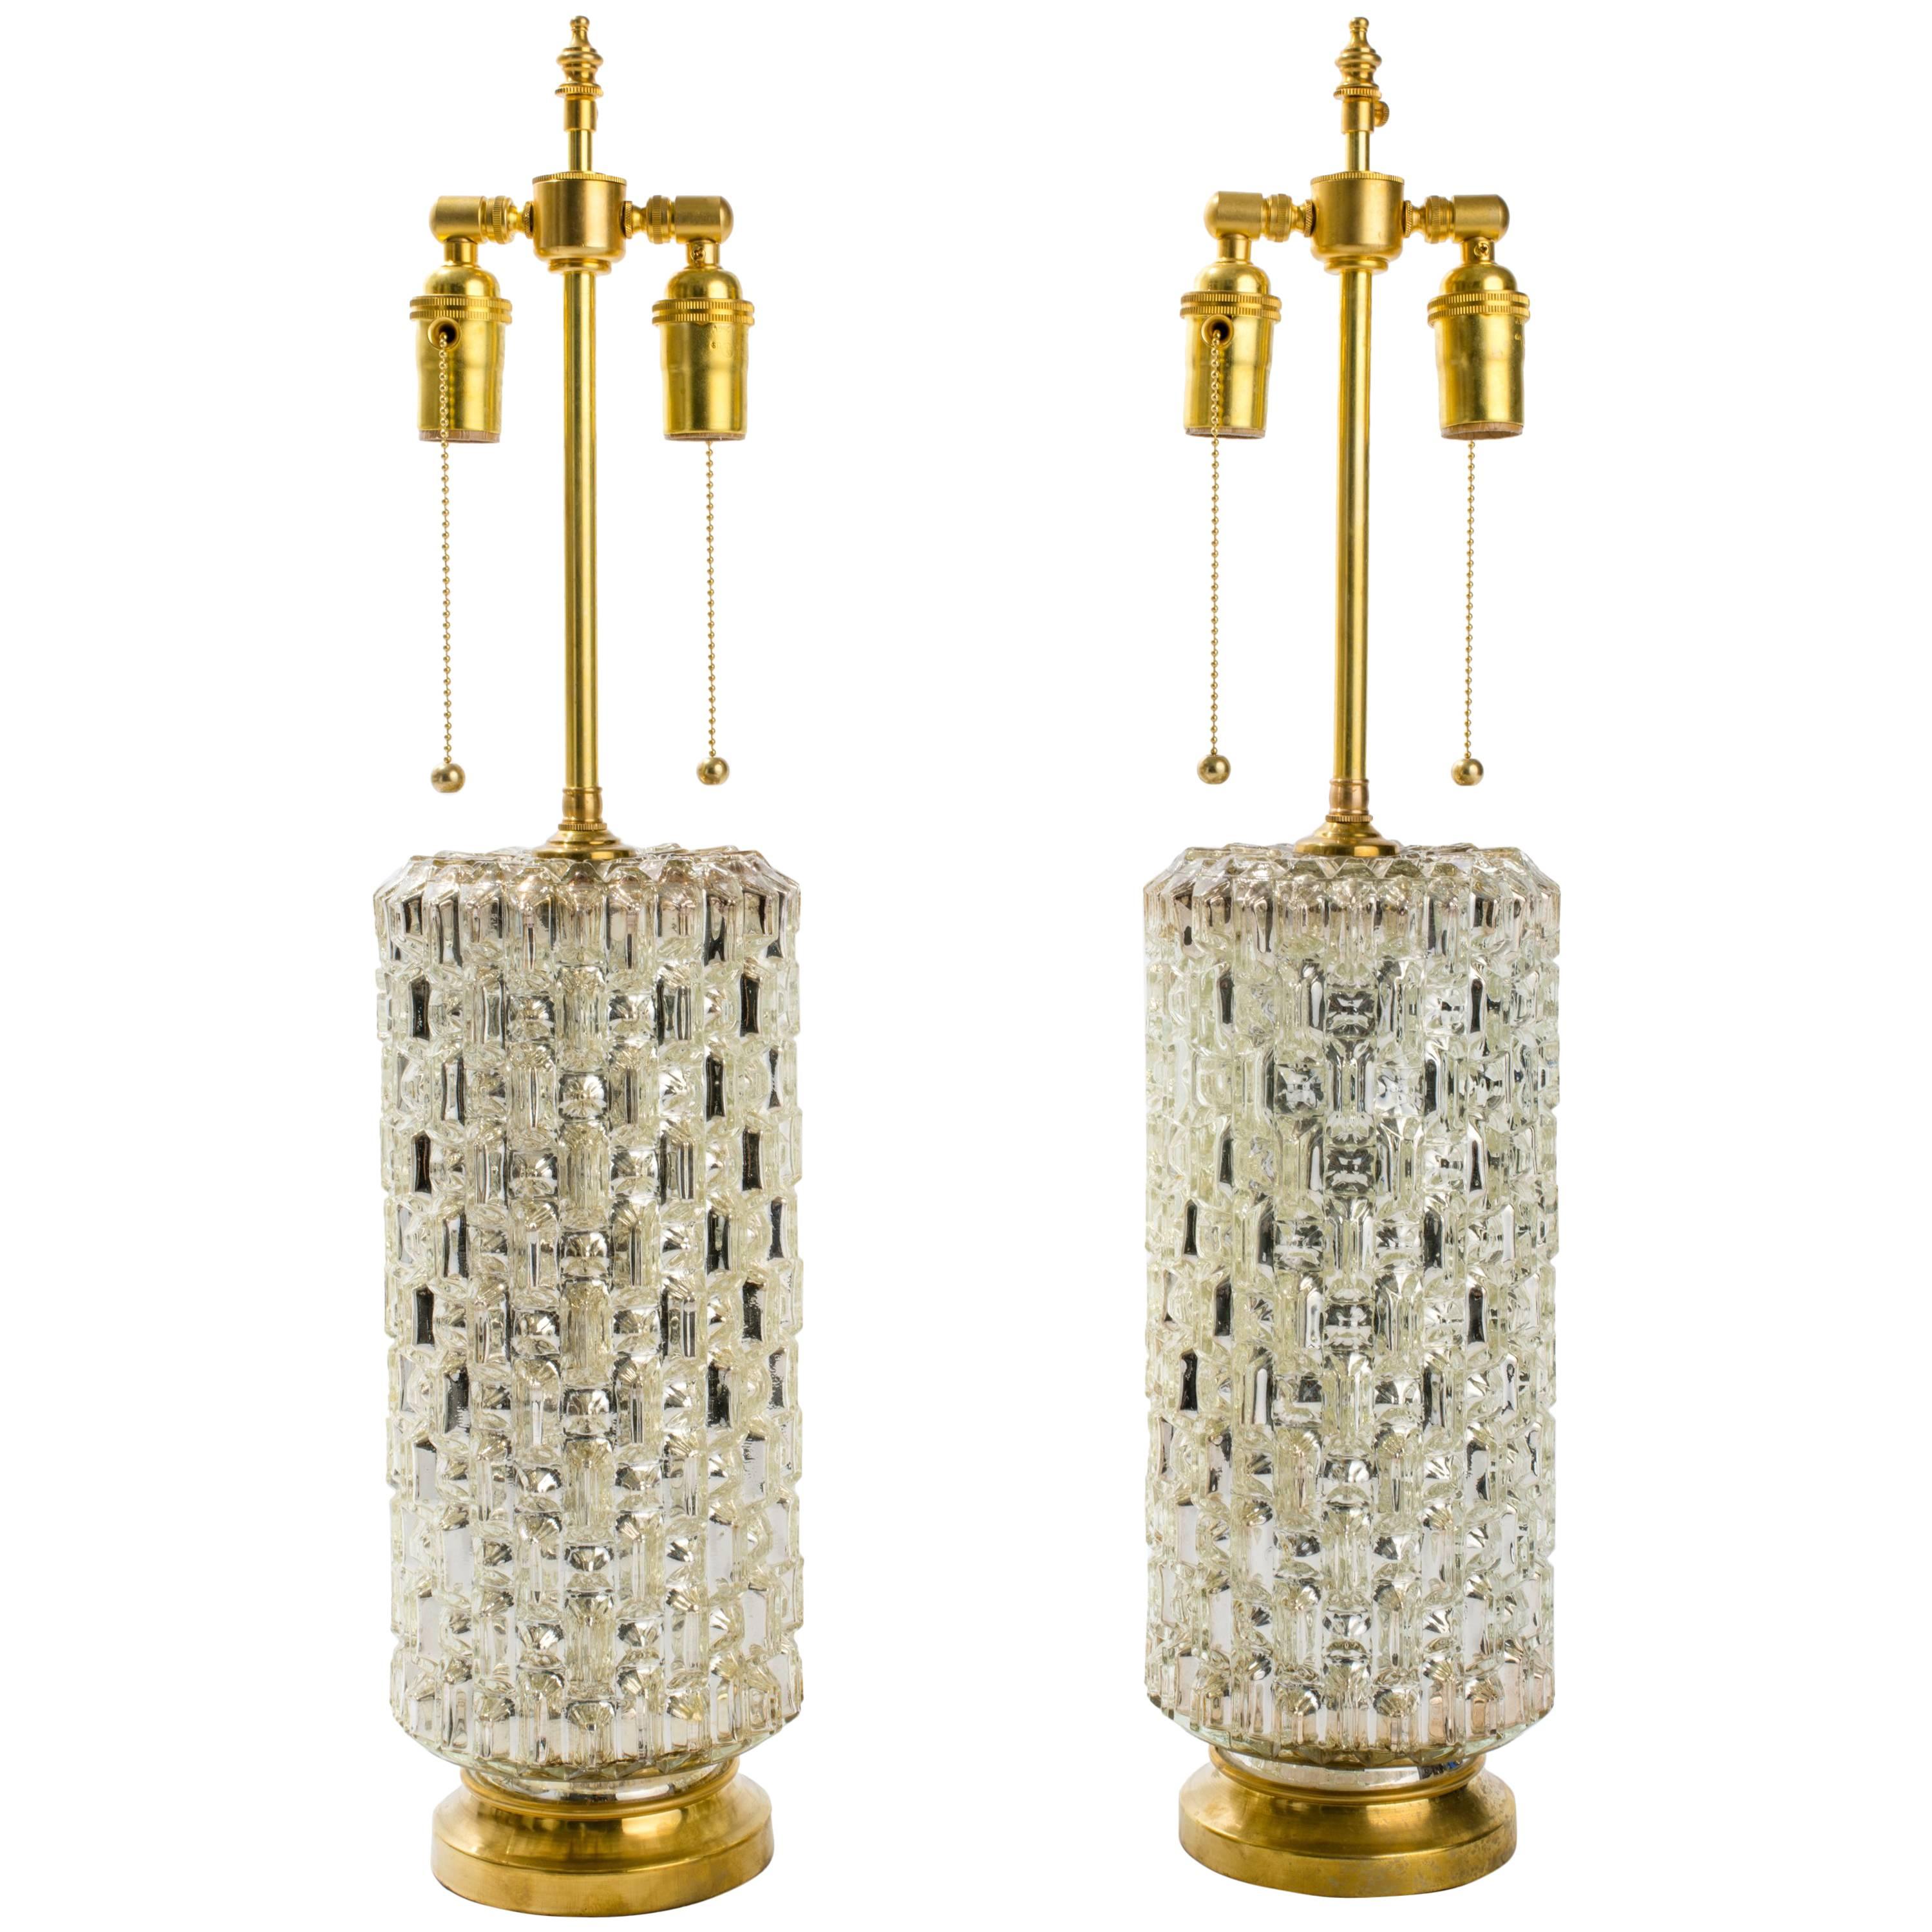 Textured Cylindrical Mercury Glass Lamps